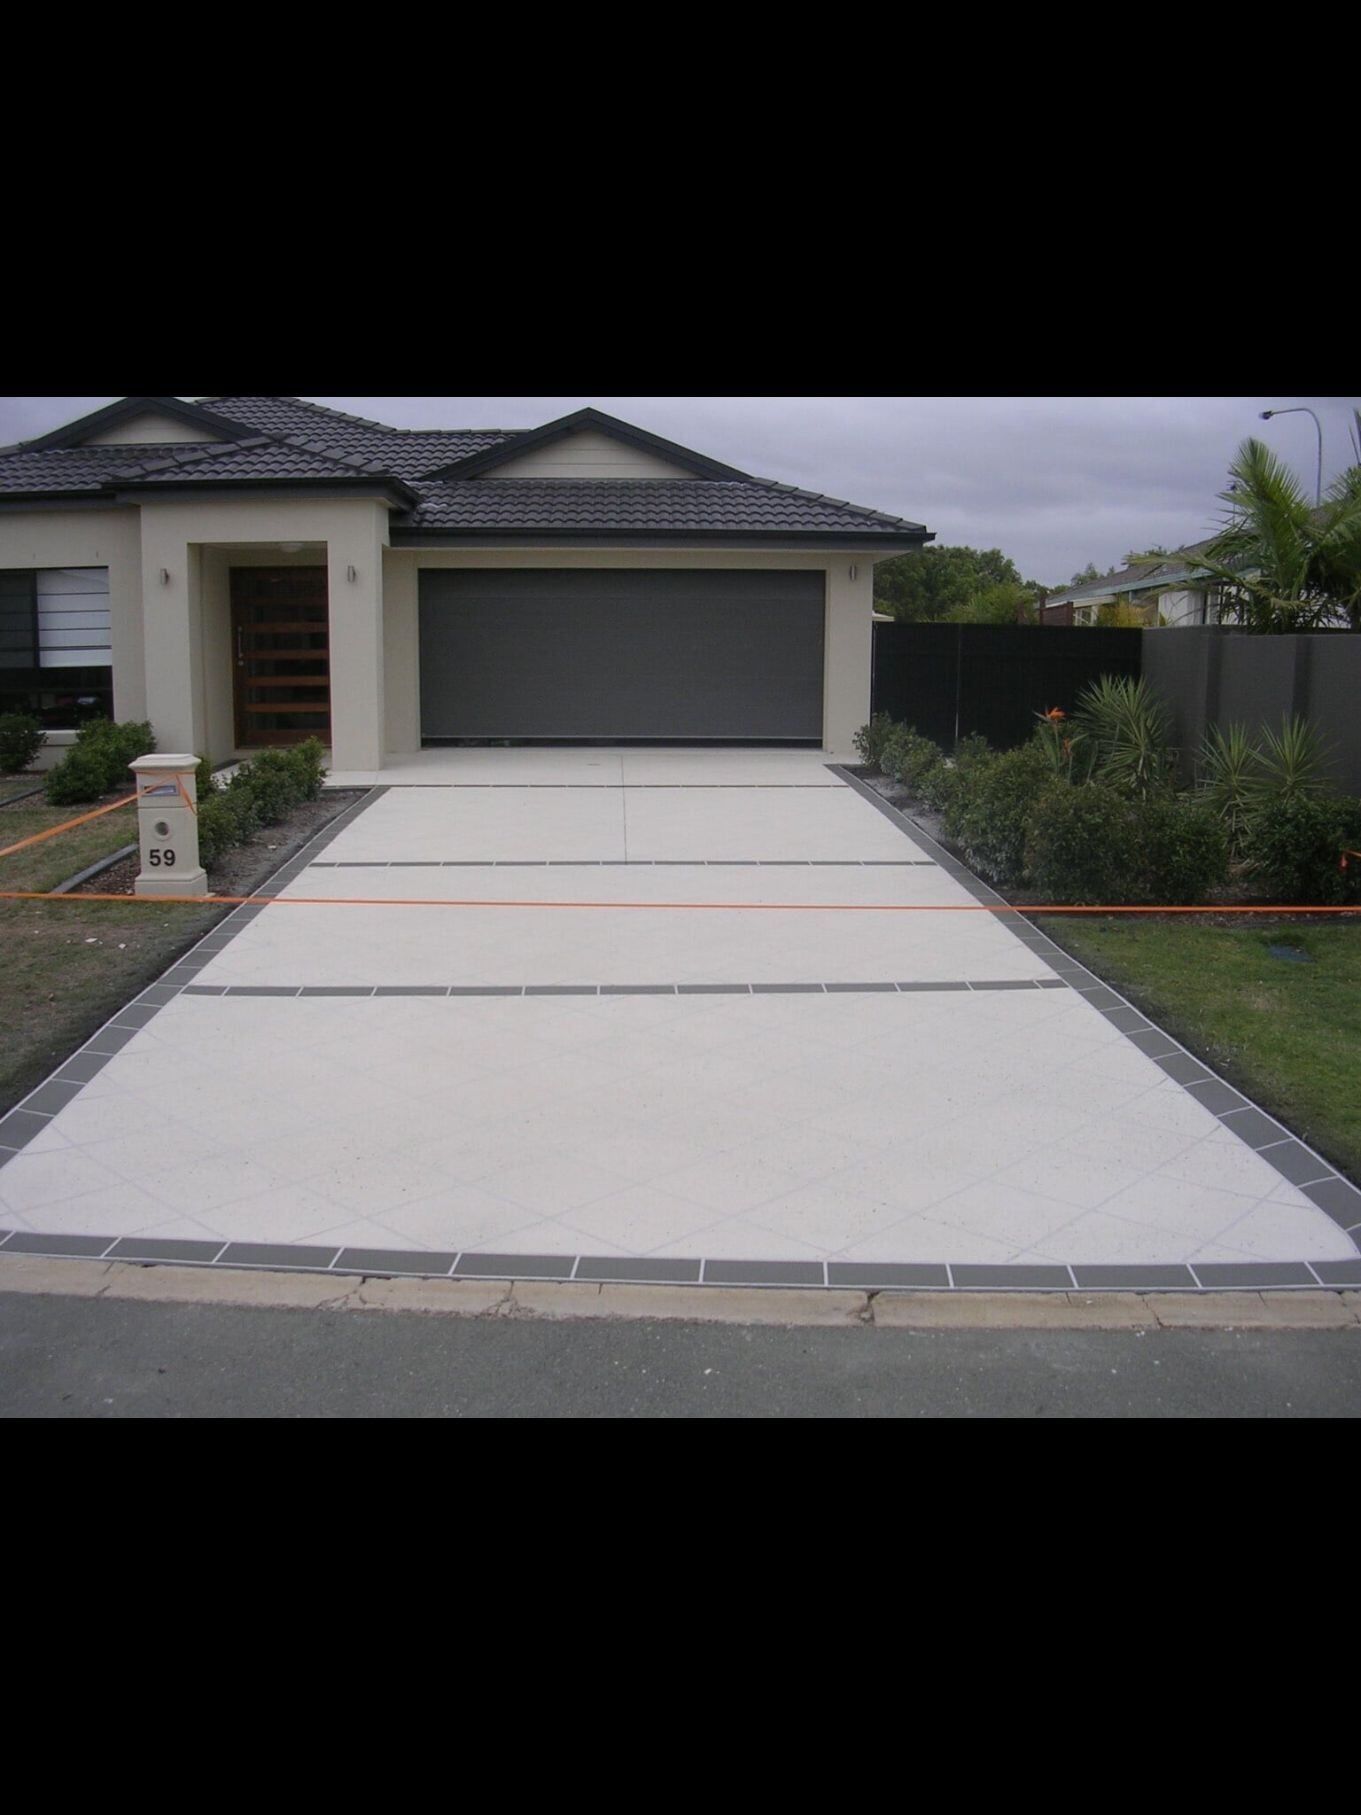 Front View Garage — River2Coast Concreting In Coffs Harbour Jetty, NSW